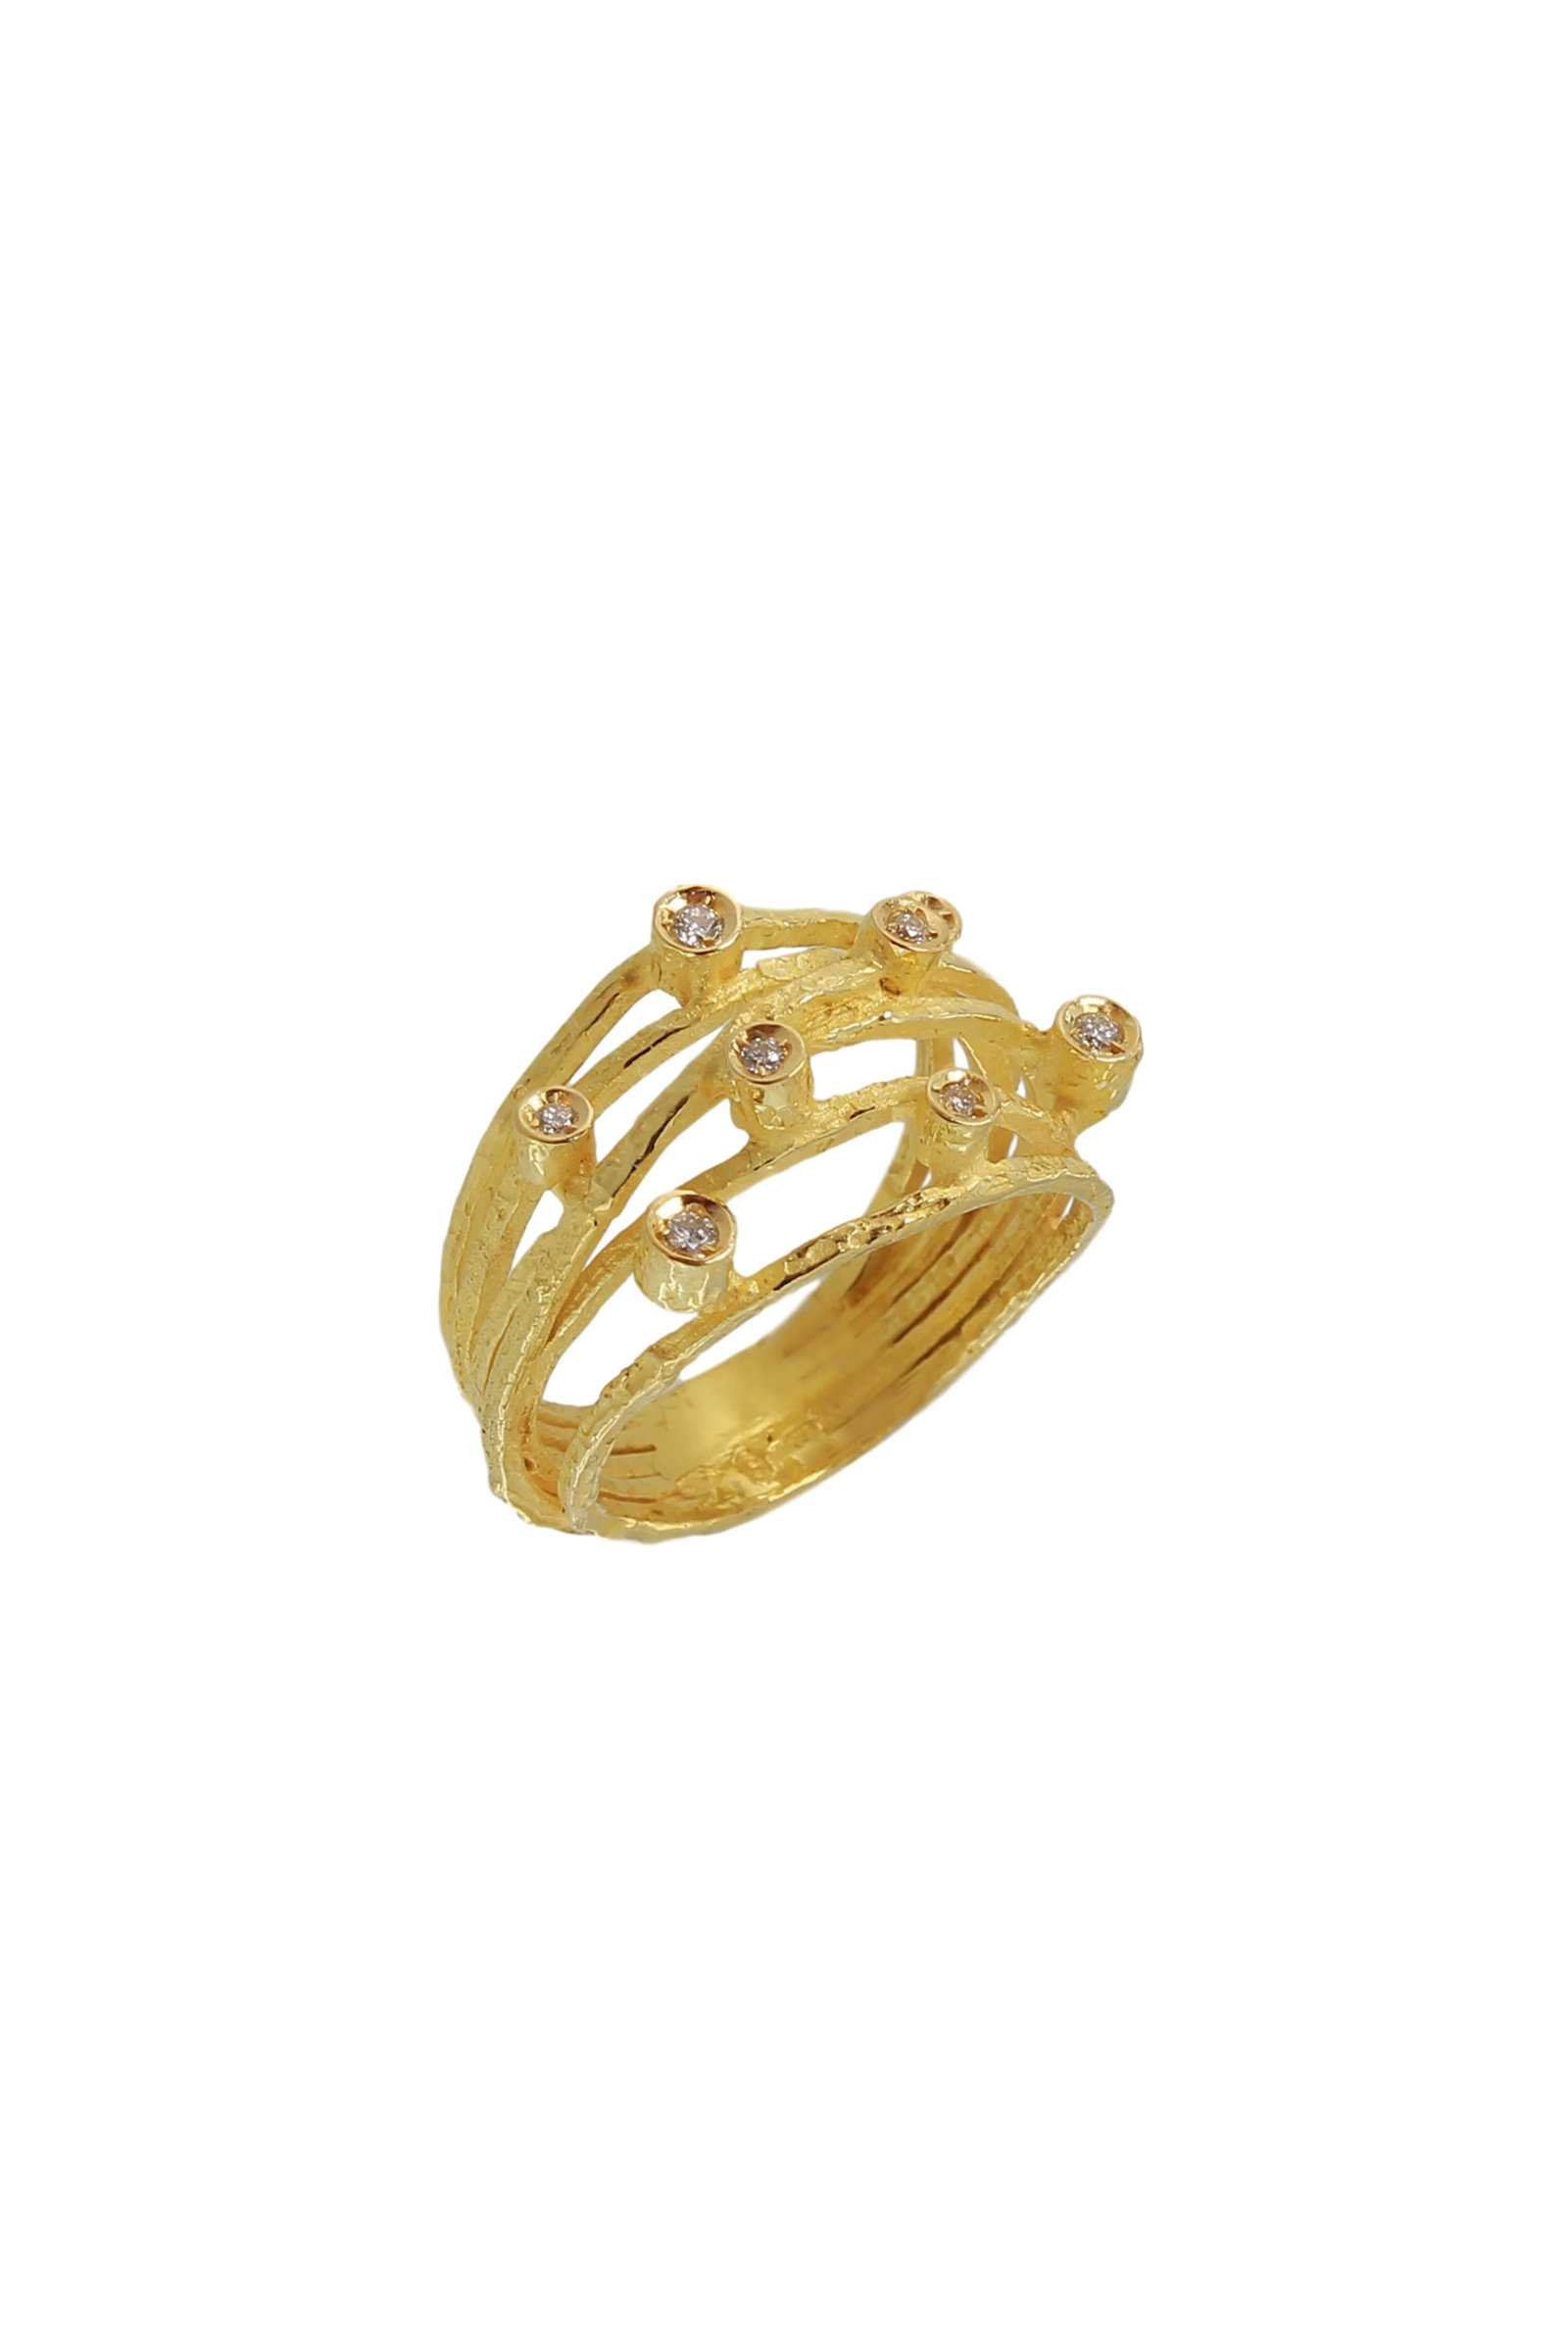 SE303ABT-18-Kt-Yellow-Gold-Wire-Ring-with-Diamonds-1